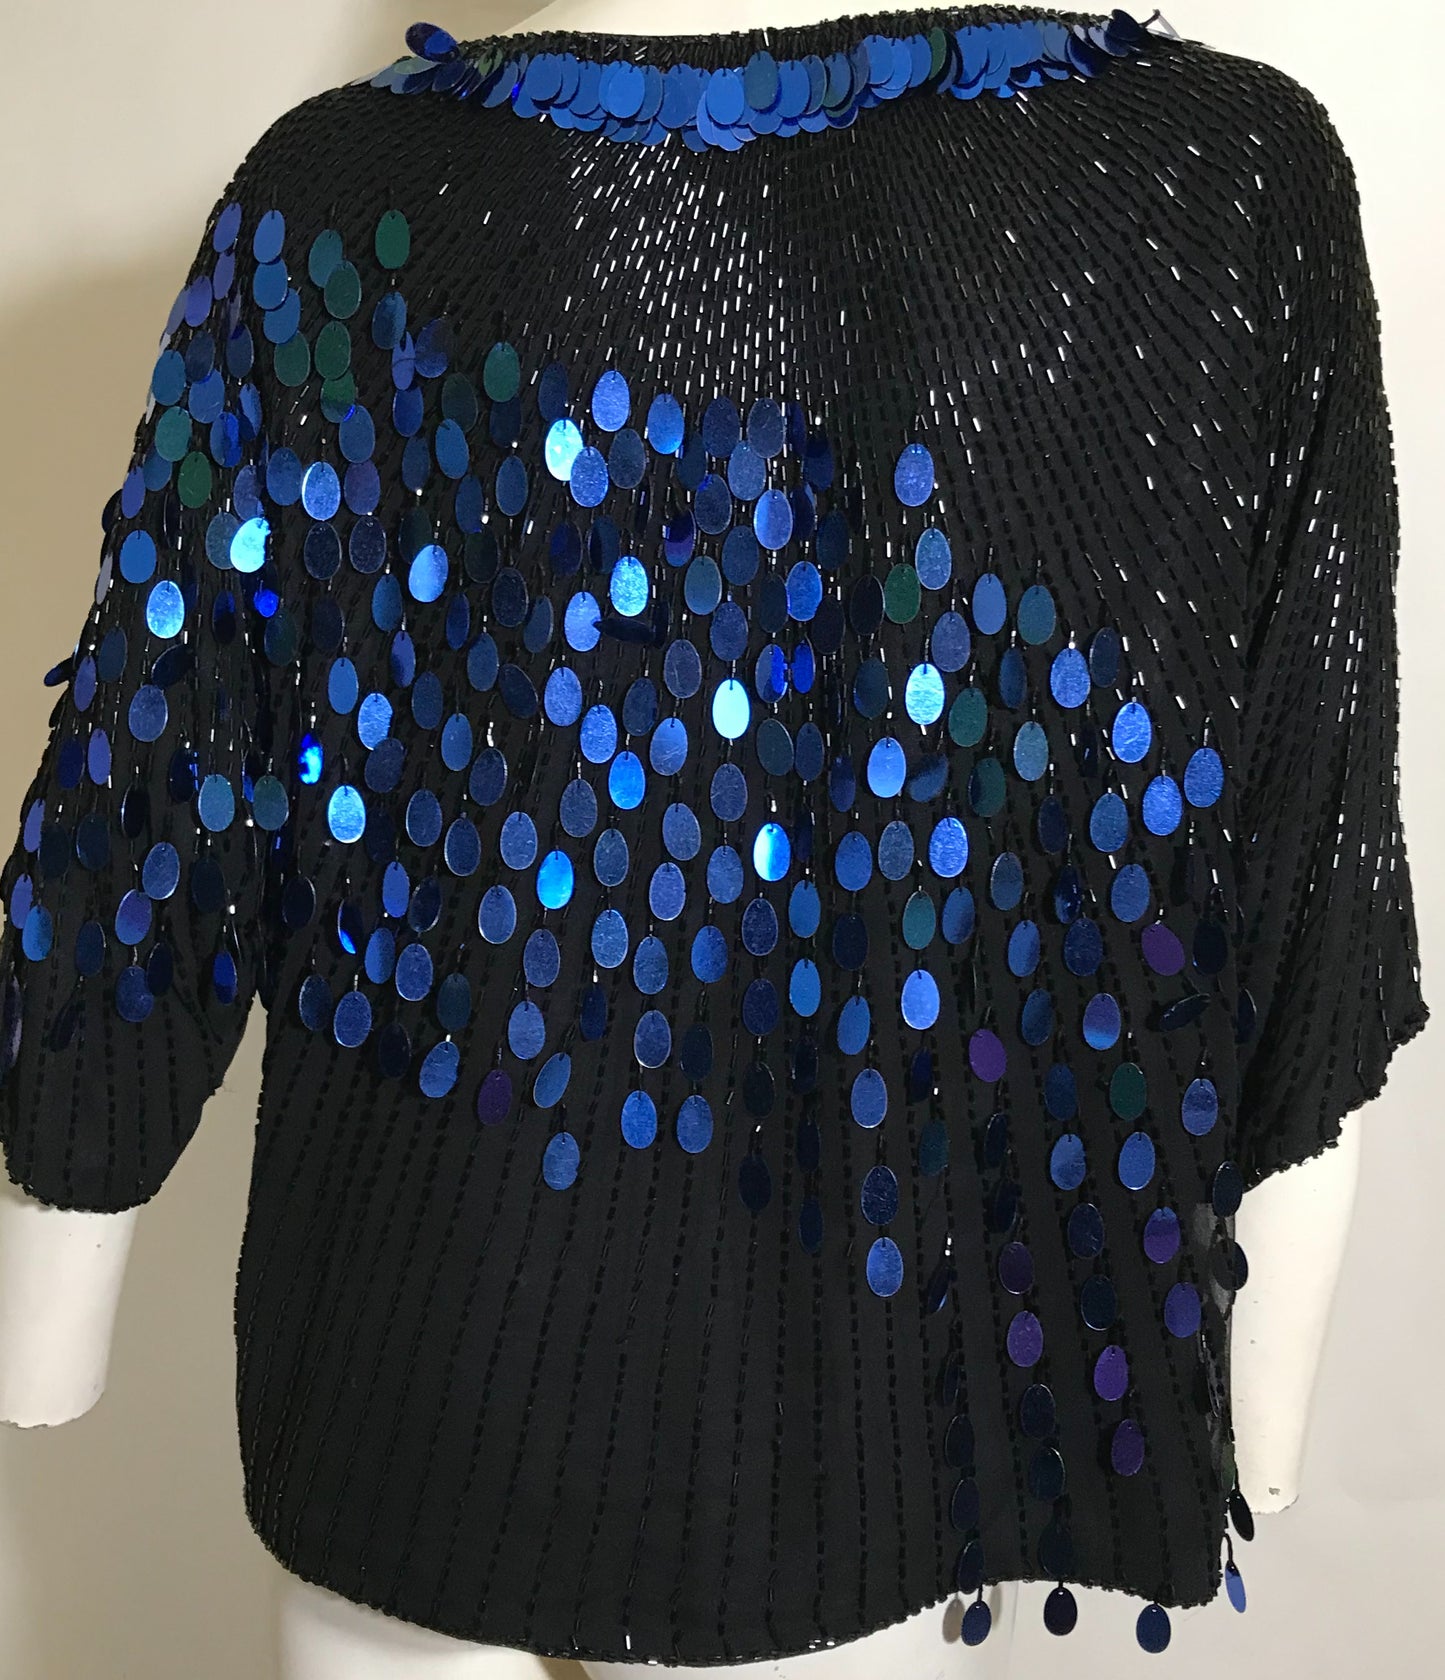 Shimmering Black and Blue Paillette Sequined and Beaded Blouse circa 1980s